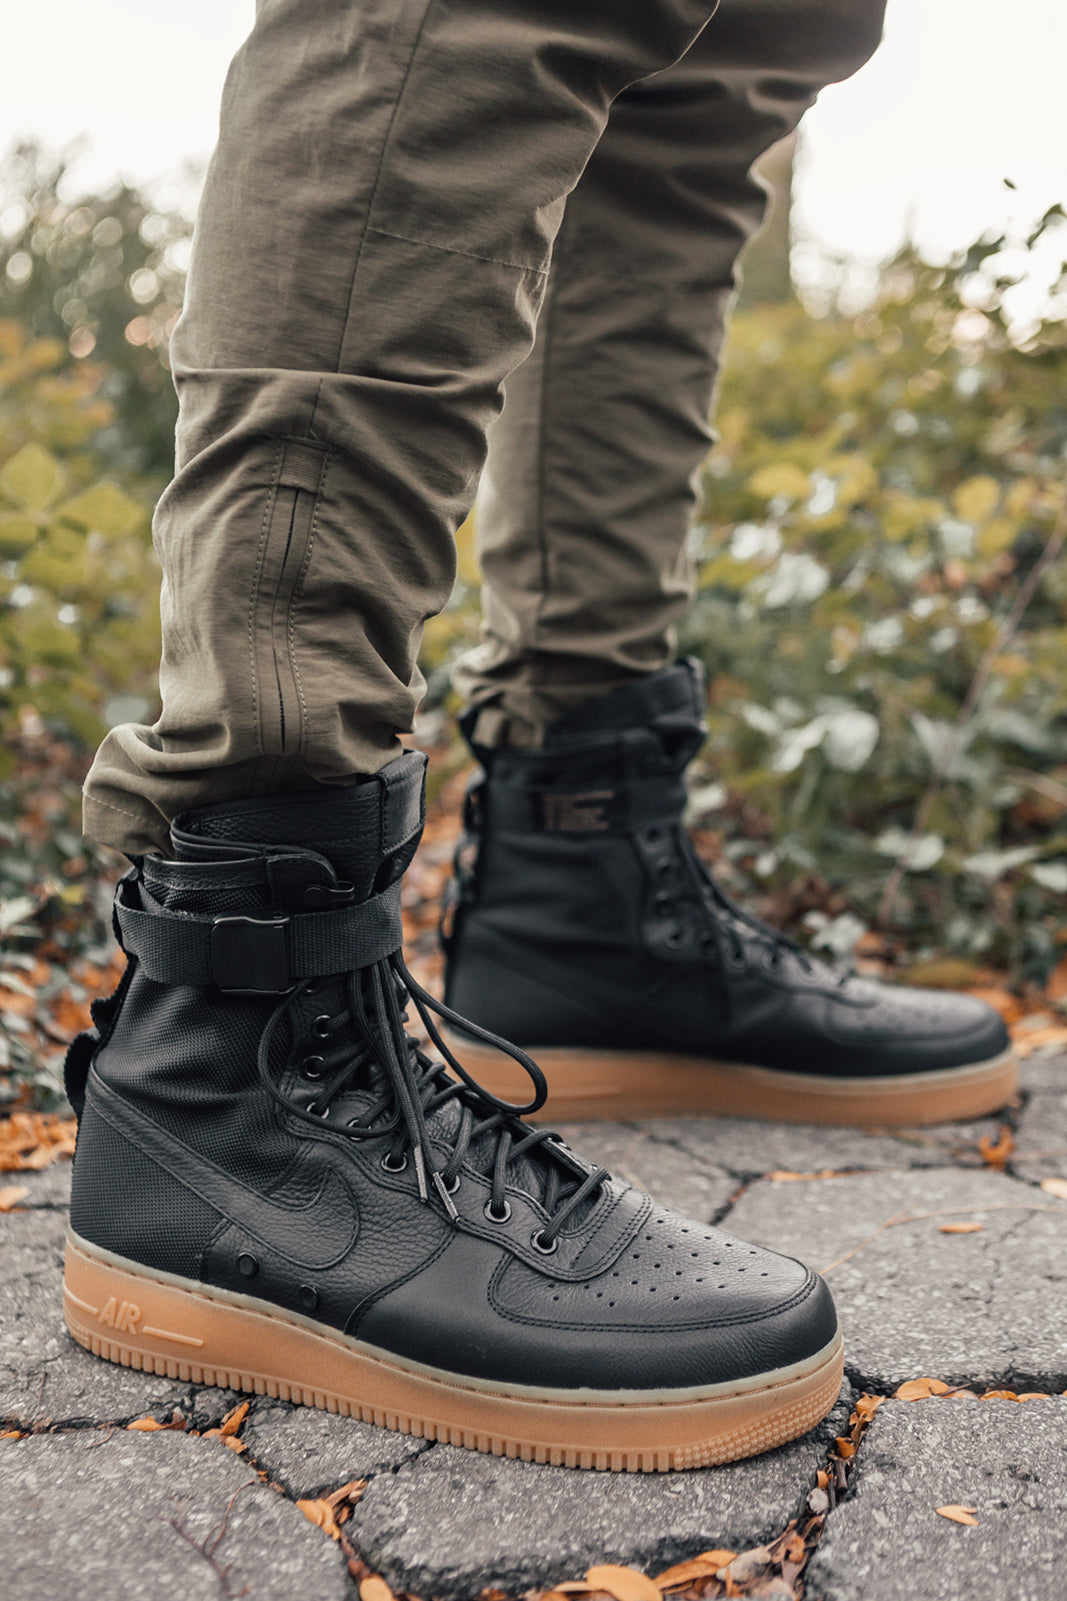 Kith for the Nike SF-AF1